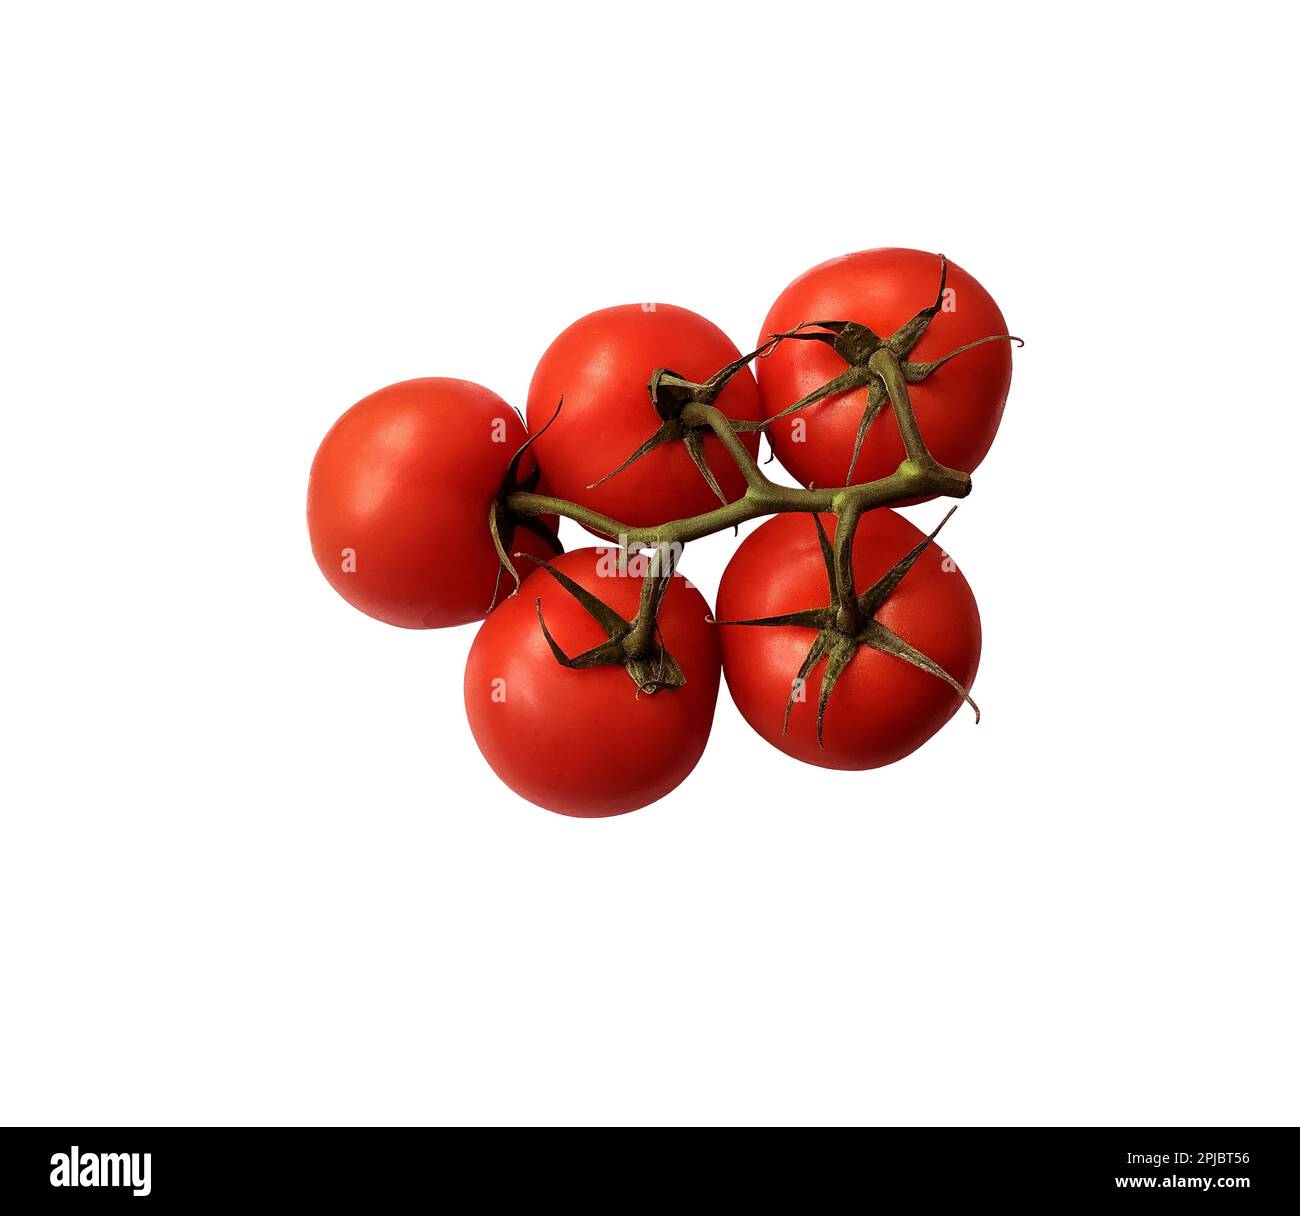 Red ripe tomatoes branch with green stem and leaves, cutout object clipping  path, organic vegetable healthy diet concept Stock Photo - Alamy